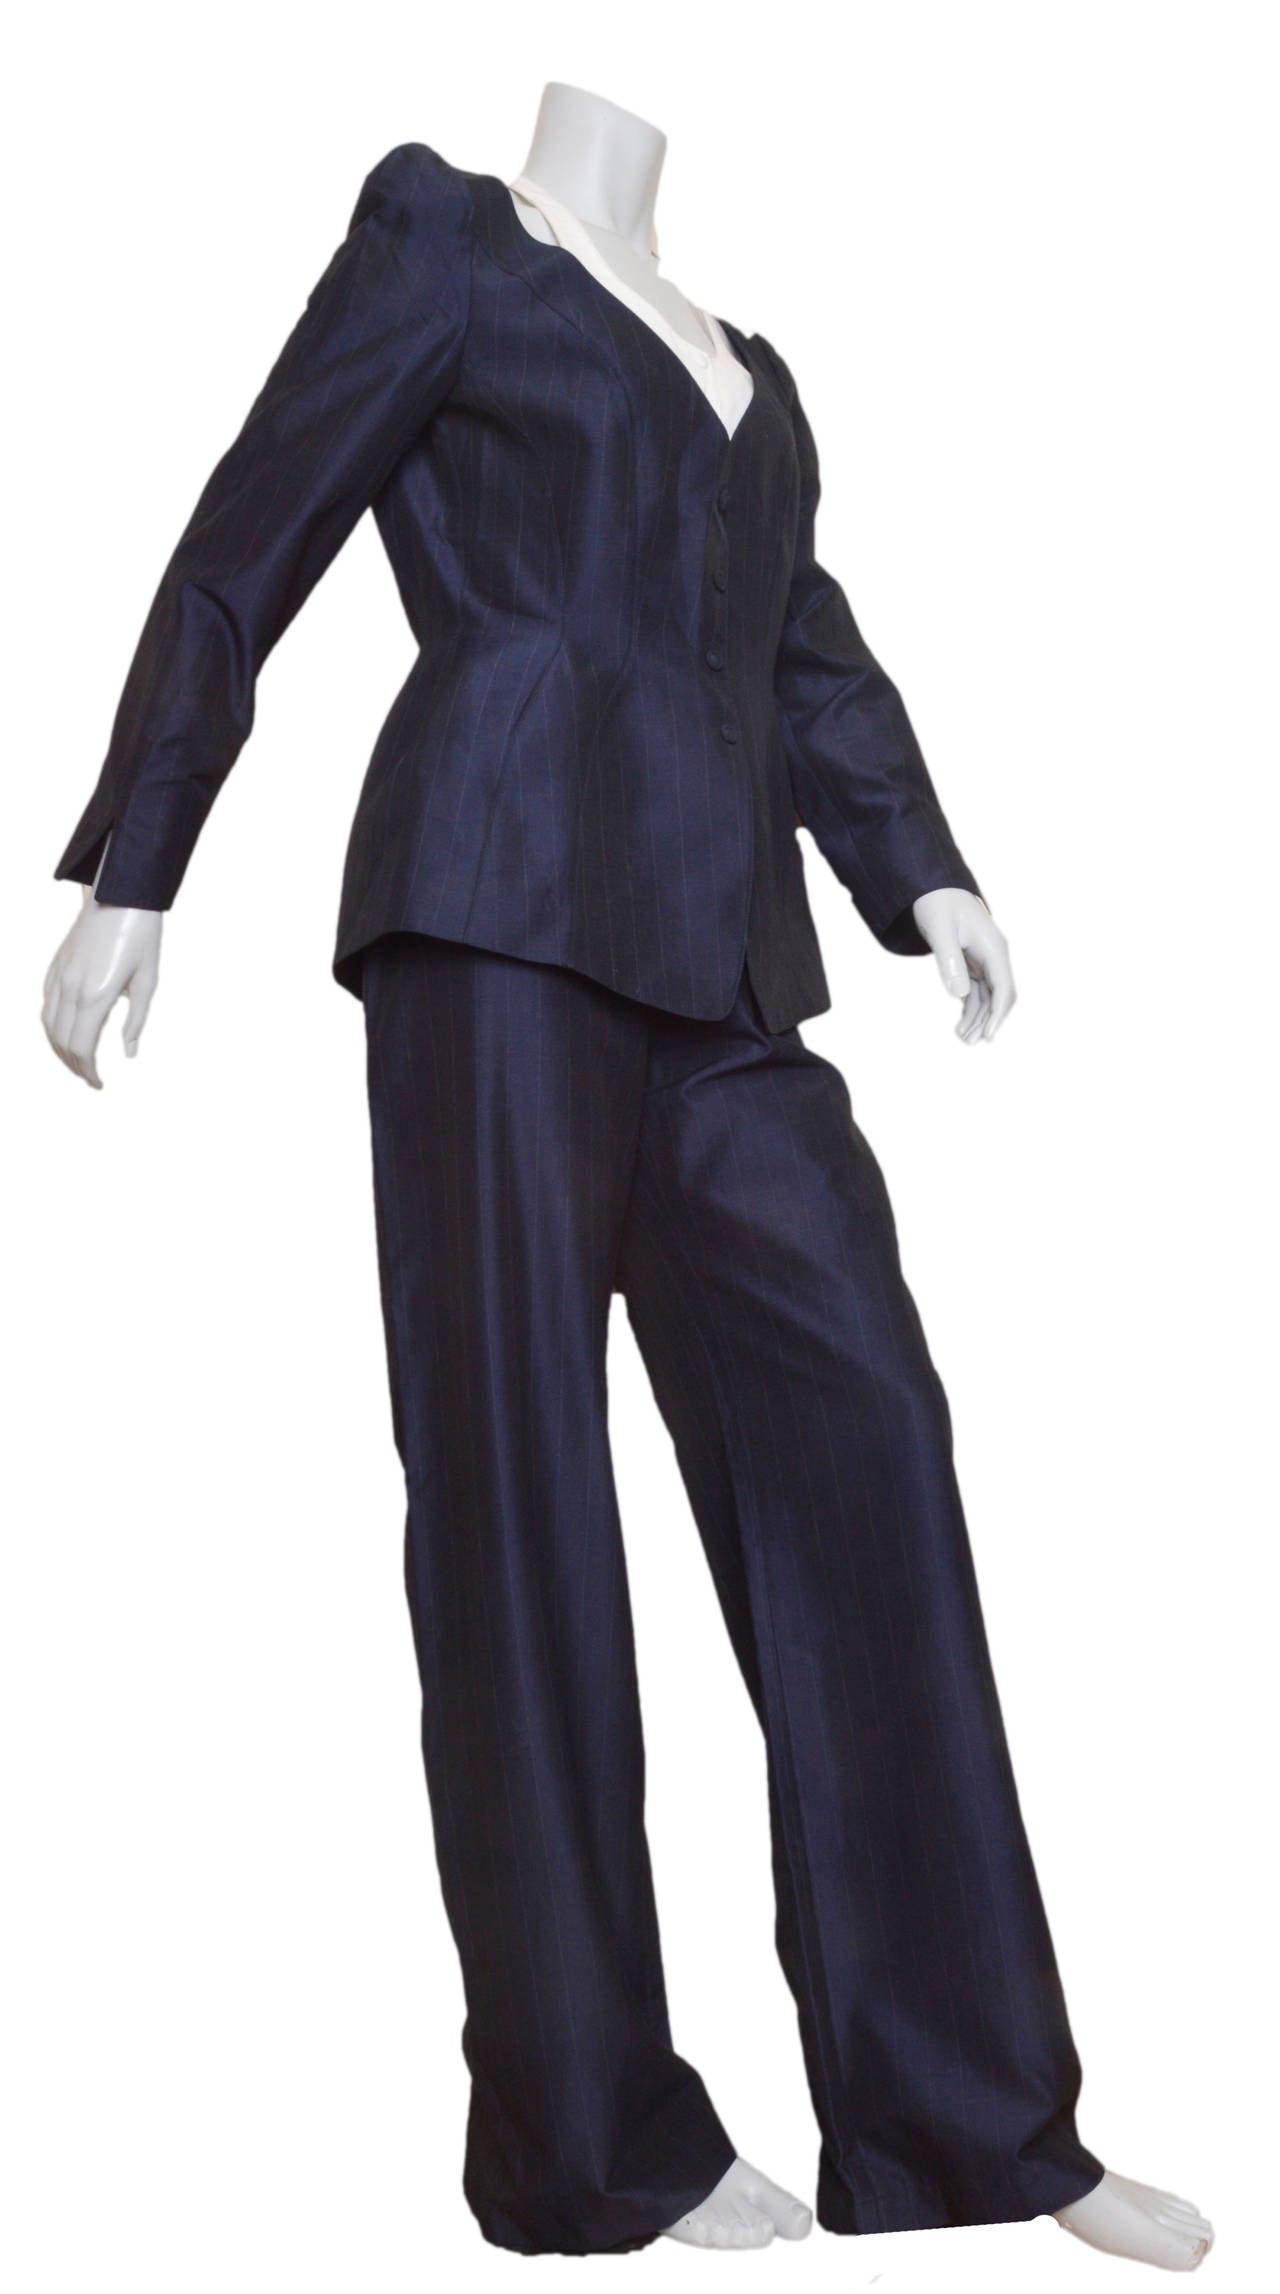 Incredible and iconic Thierry Mugler pant suit.
Navy blue with white pin striping. Fabric has slight sheen.
Jacket has hidden snap closures with faux fabric buttons.
Hourglass shape/seaming and side slit pockets on hip.
Built in white bib/vest